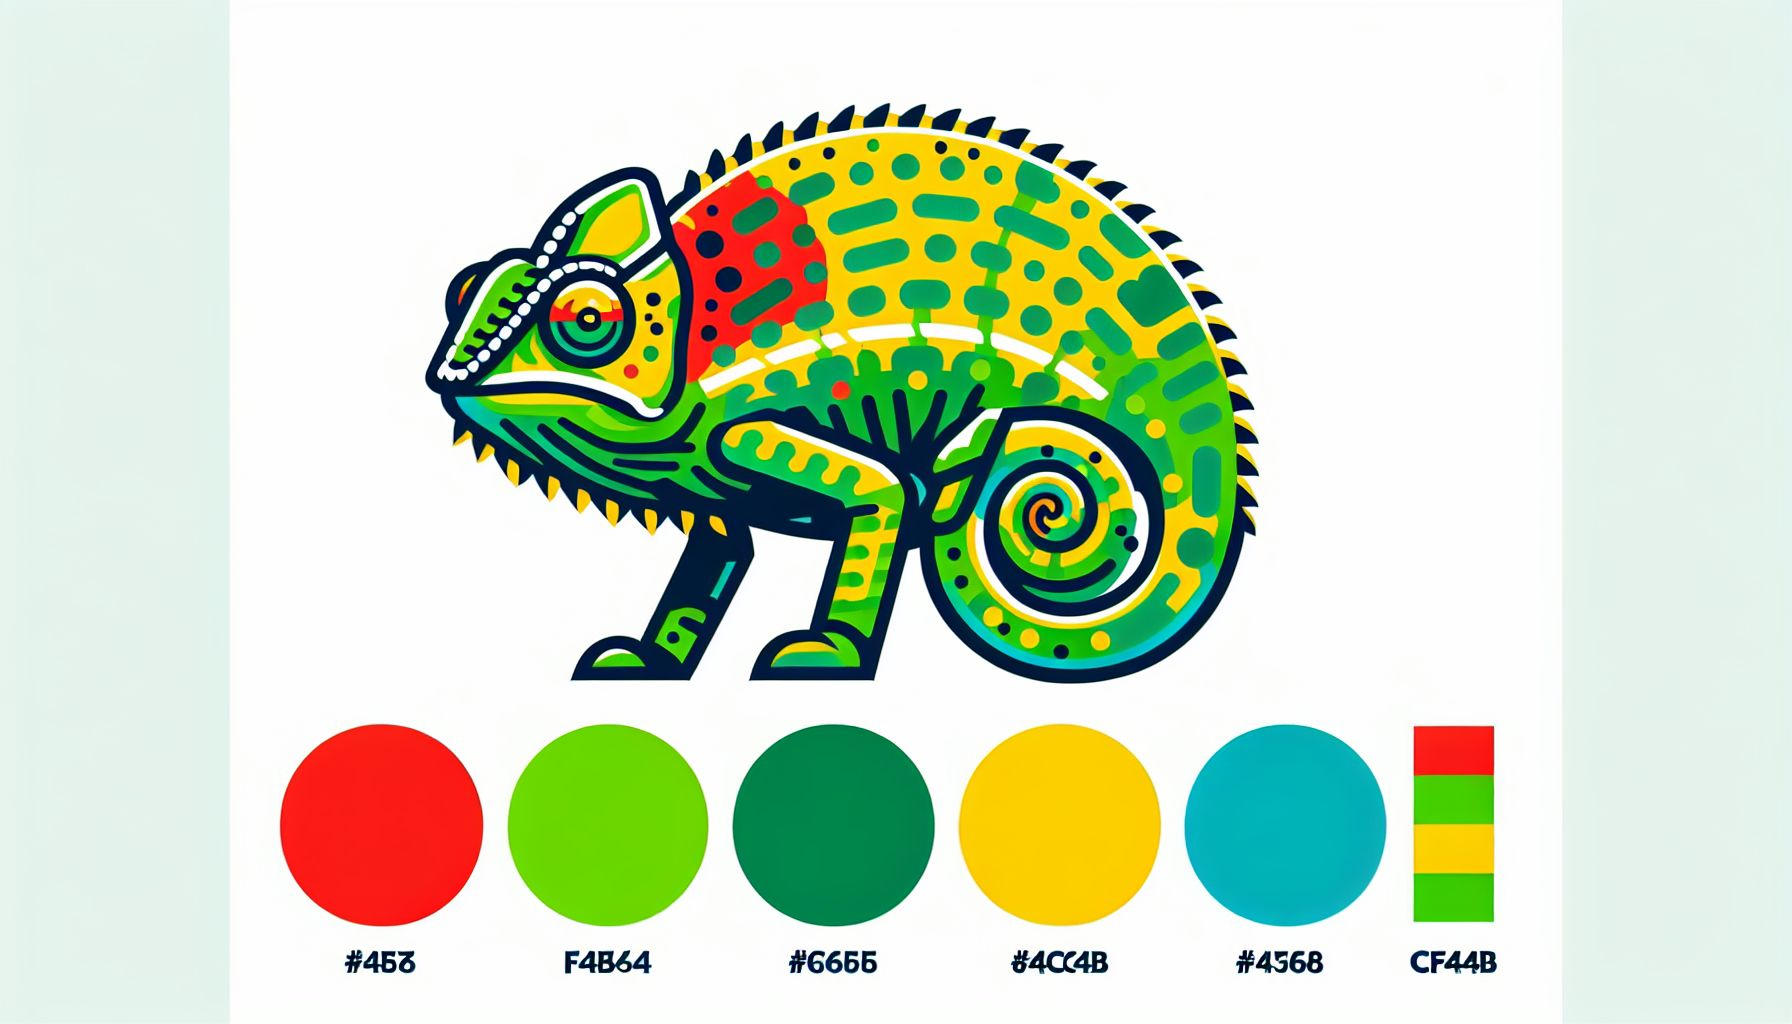 Chameleon in flat illustration style and white background, red #f47574, green #88c7a8, yellow #fcc44b, and blue #645bc8 colors.